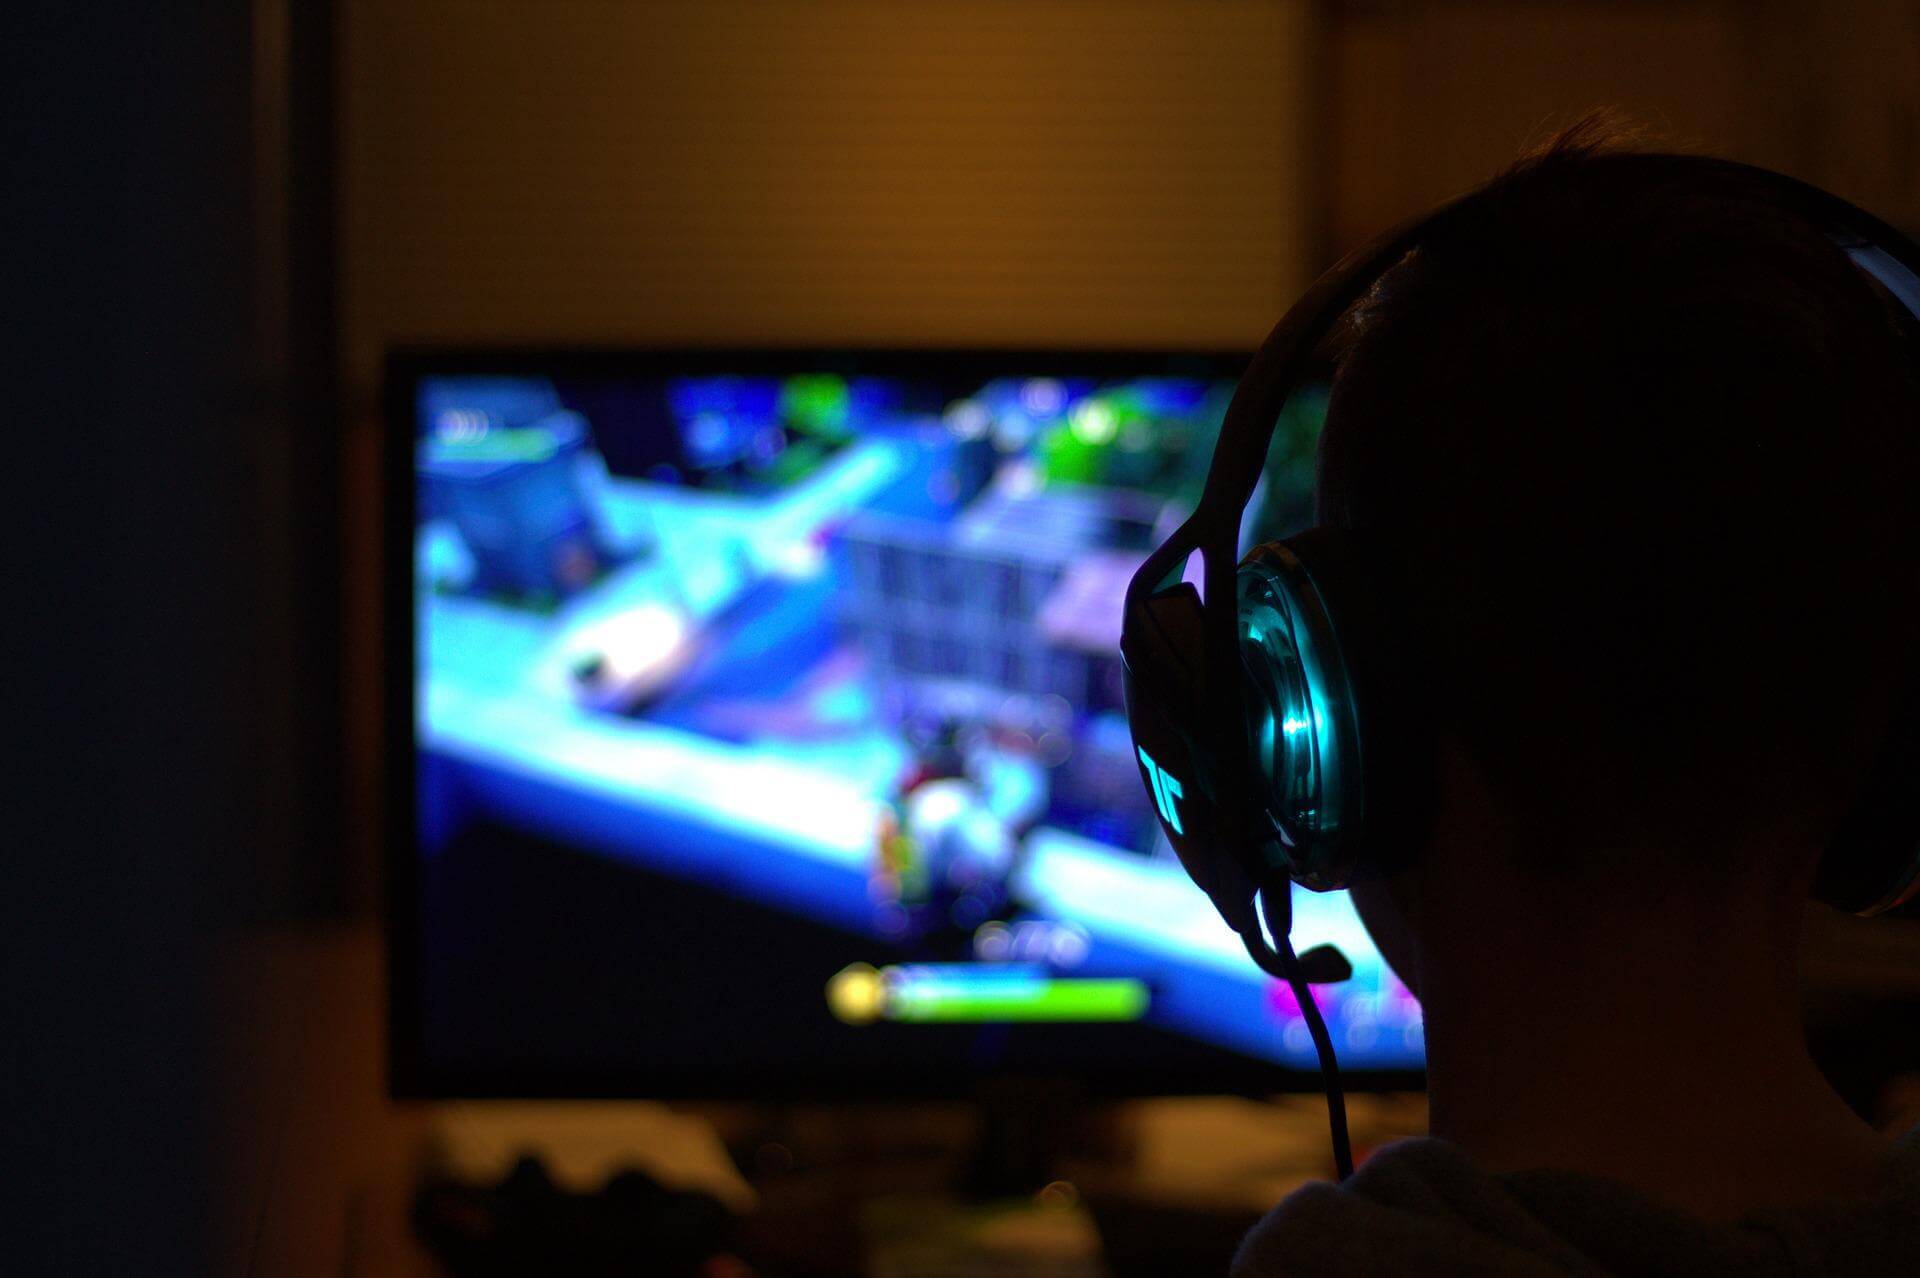 Silhouette seen from behind playing video game